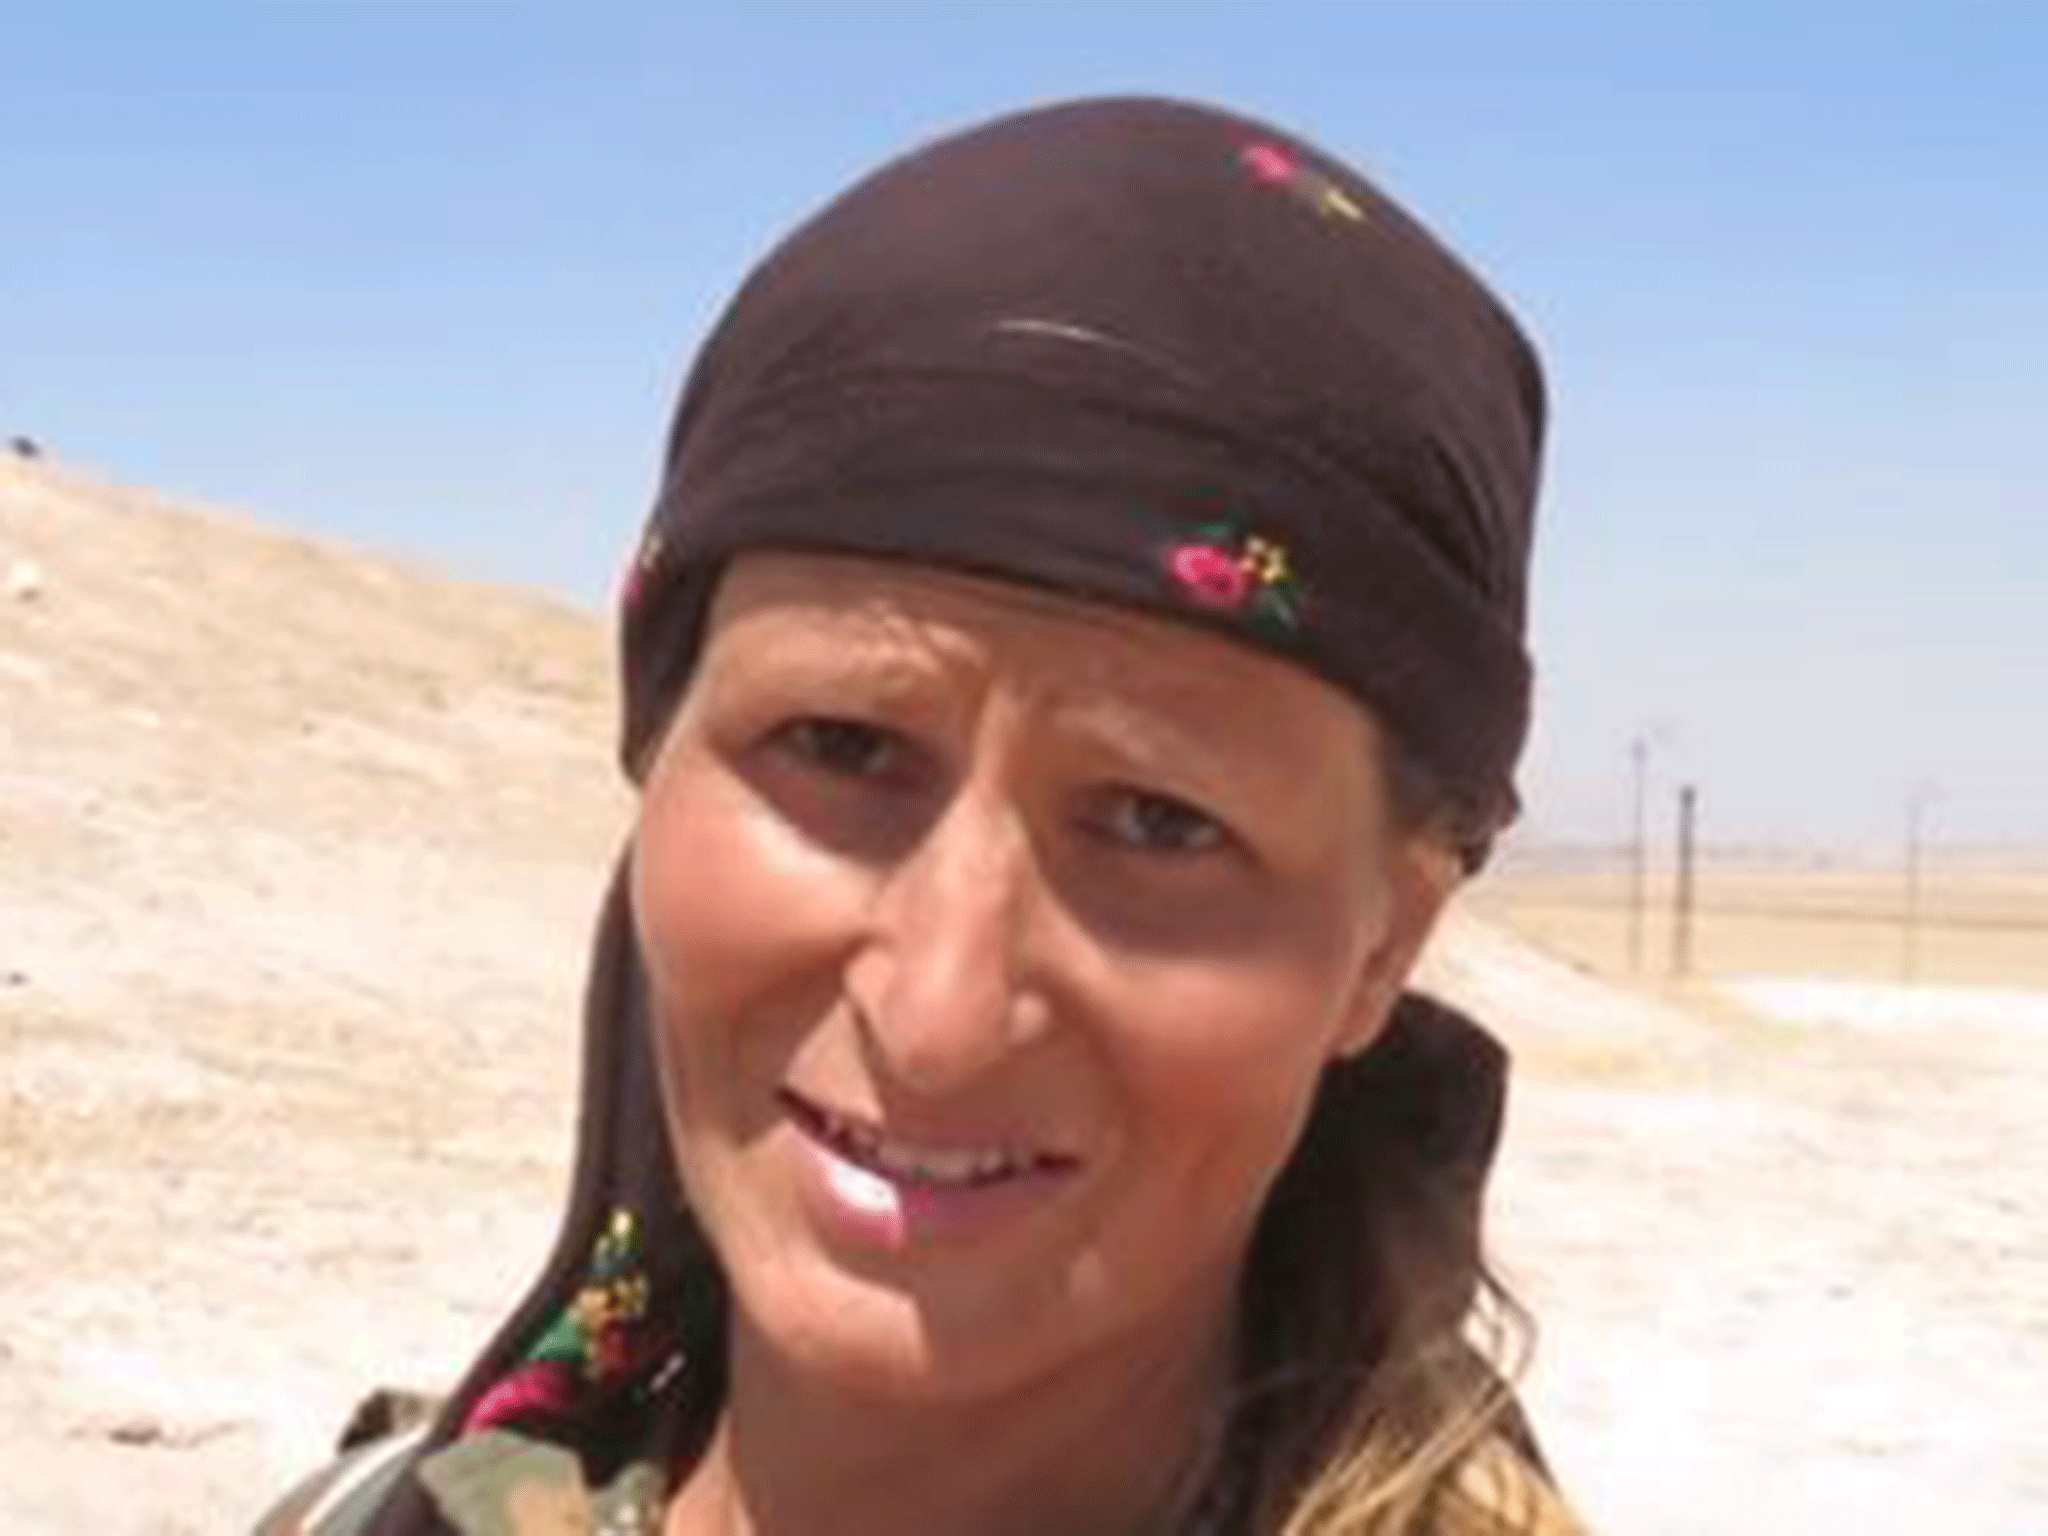 Female Canadian soldier unimpressed by Isis' strength in battle